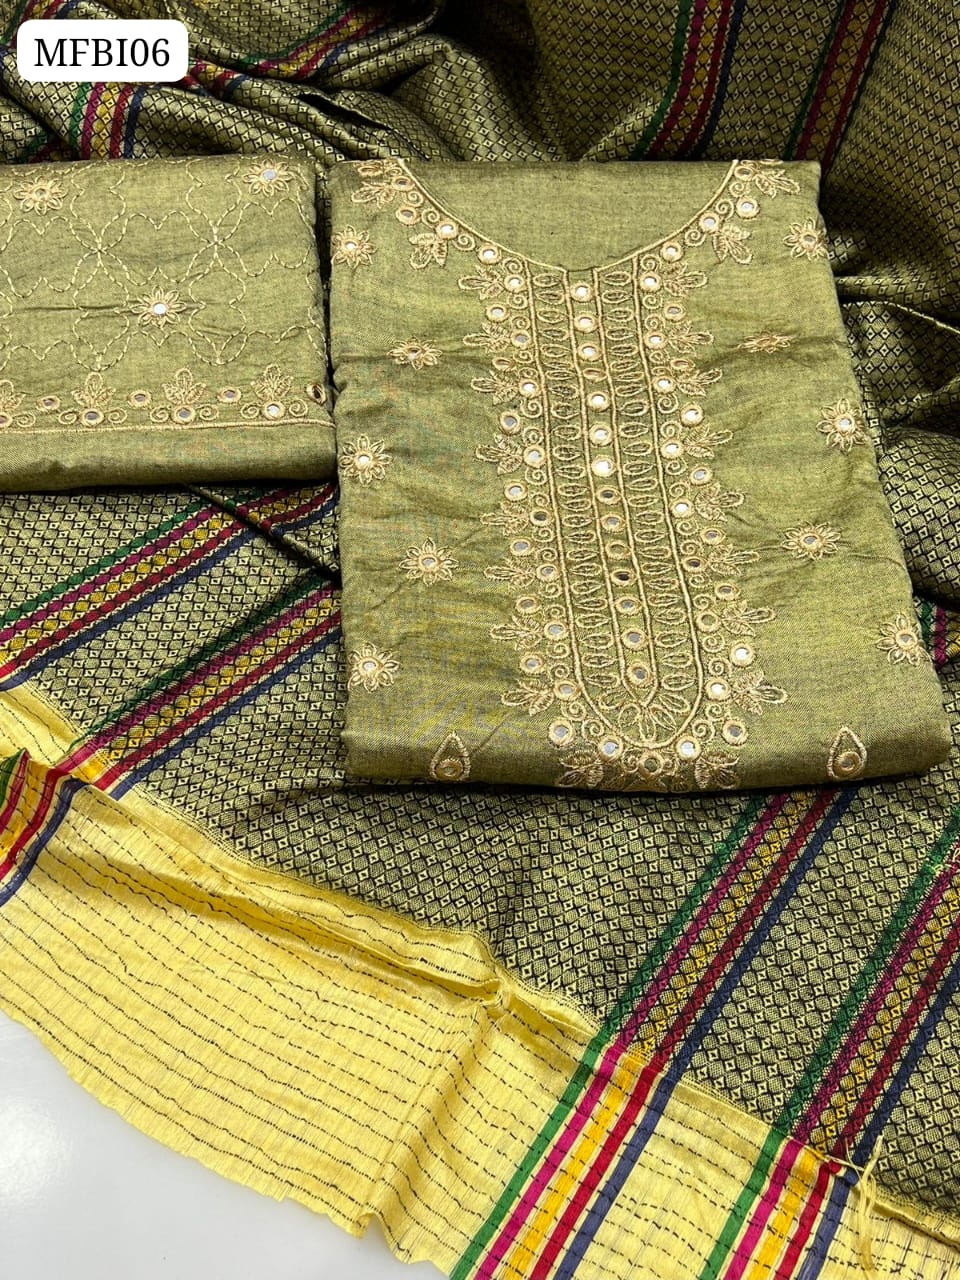 Sussi Fabric Karahi 9Mm Computer Work Shirt With Sussi Self Jucard Dupatta And Sussi Karahi 9Mm Computer Work Trouser 3Pc Dress